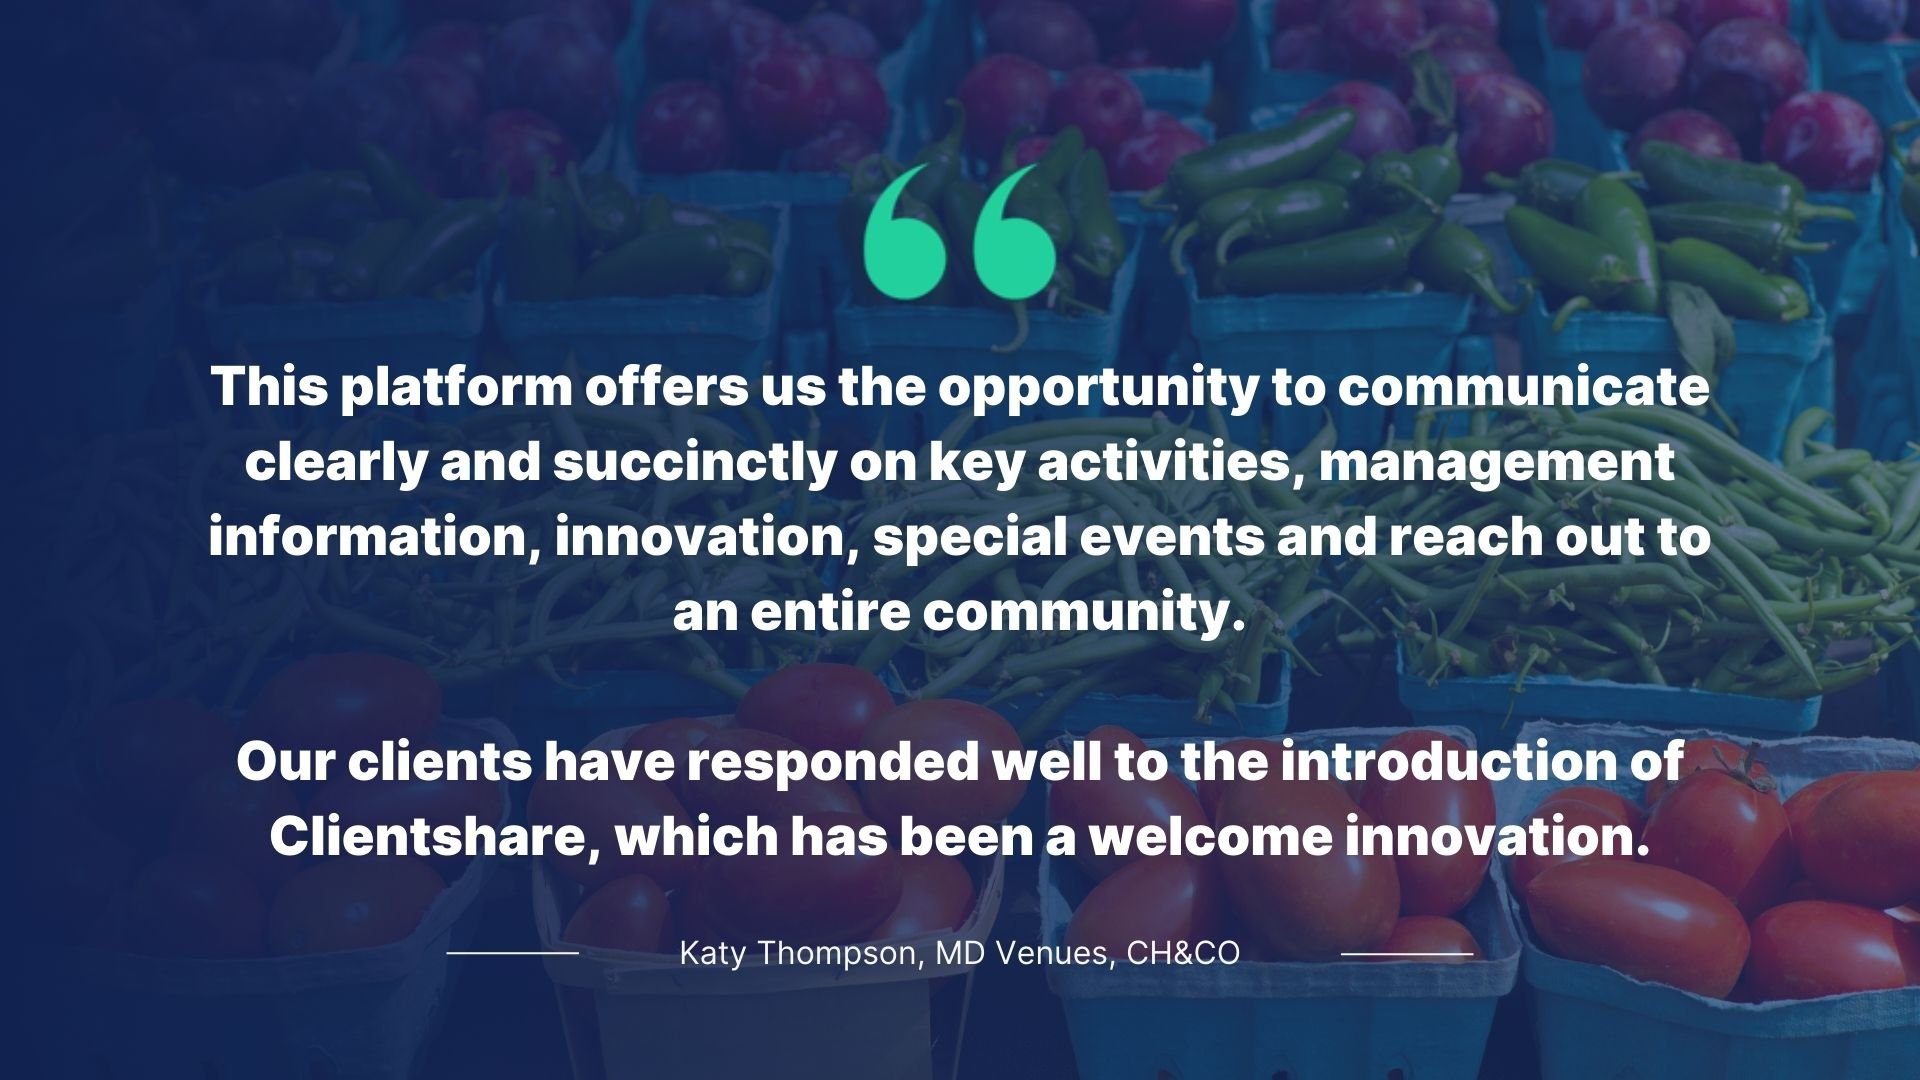 Quote by Katy Thompson, MD Venues, CH&CO: This platform offers us the opportunity to communicate clearly and succinctly on key activities, management information, innovation, special events and reach out to an entire community. Our clients have responded well to the introduction of Clientshare, which has been a welcome innovation.